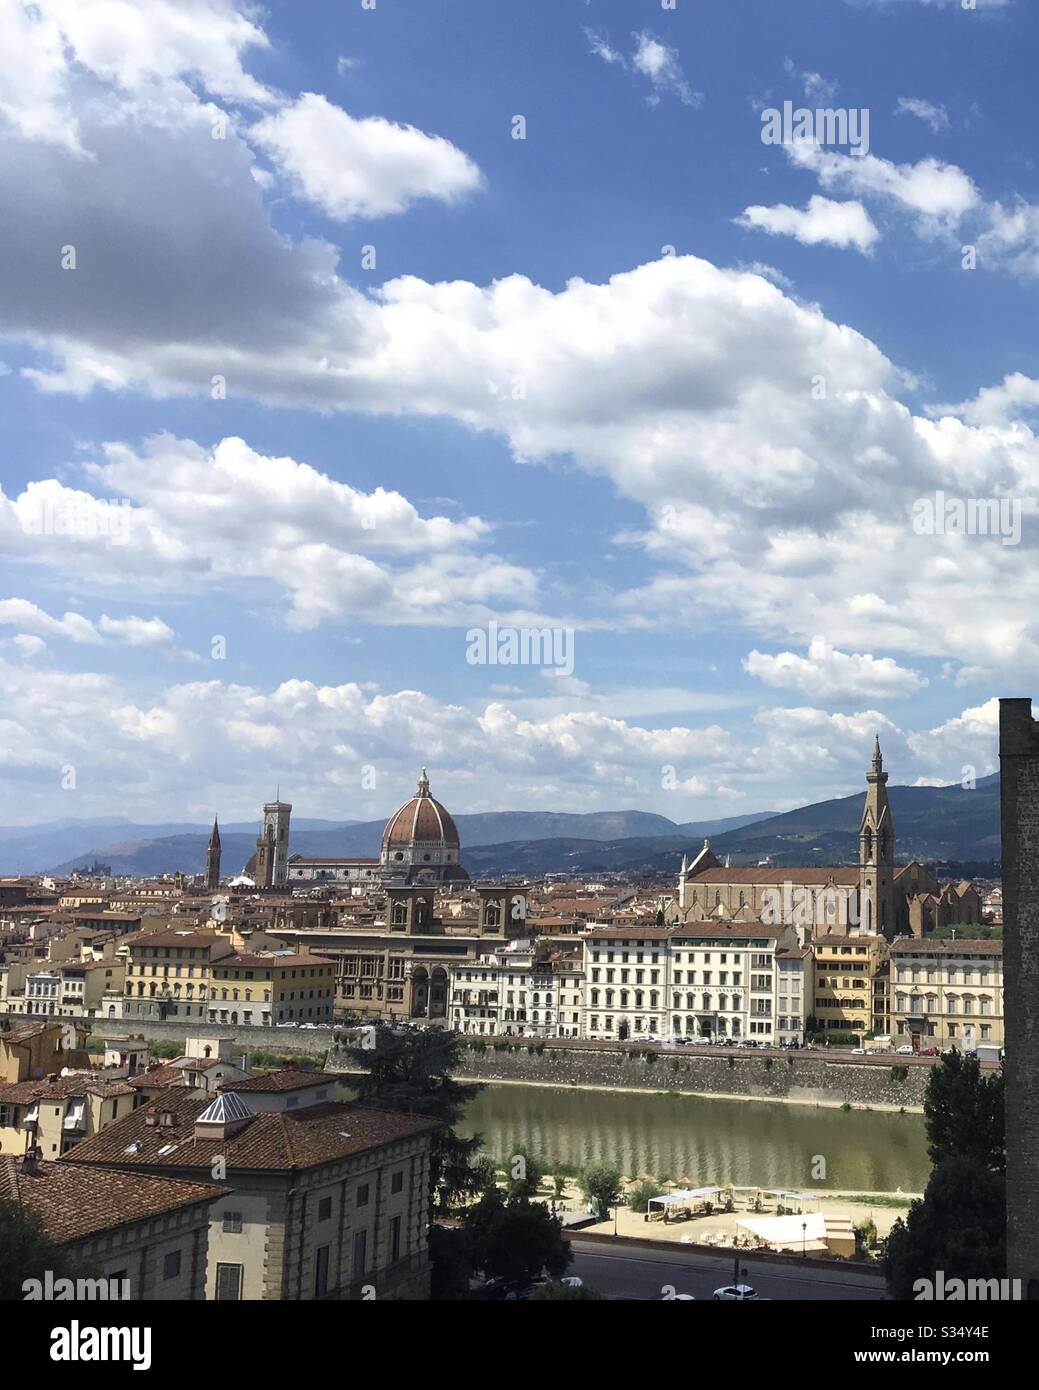 Florence and it’s famous dome. Il duomo di Firenze e belissimo. Stock Photo